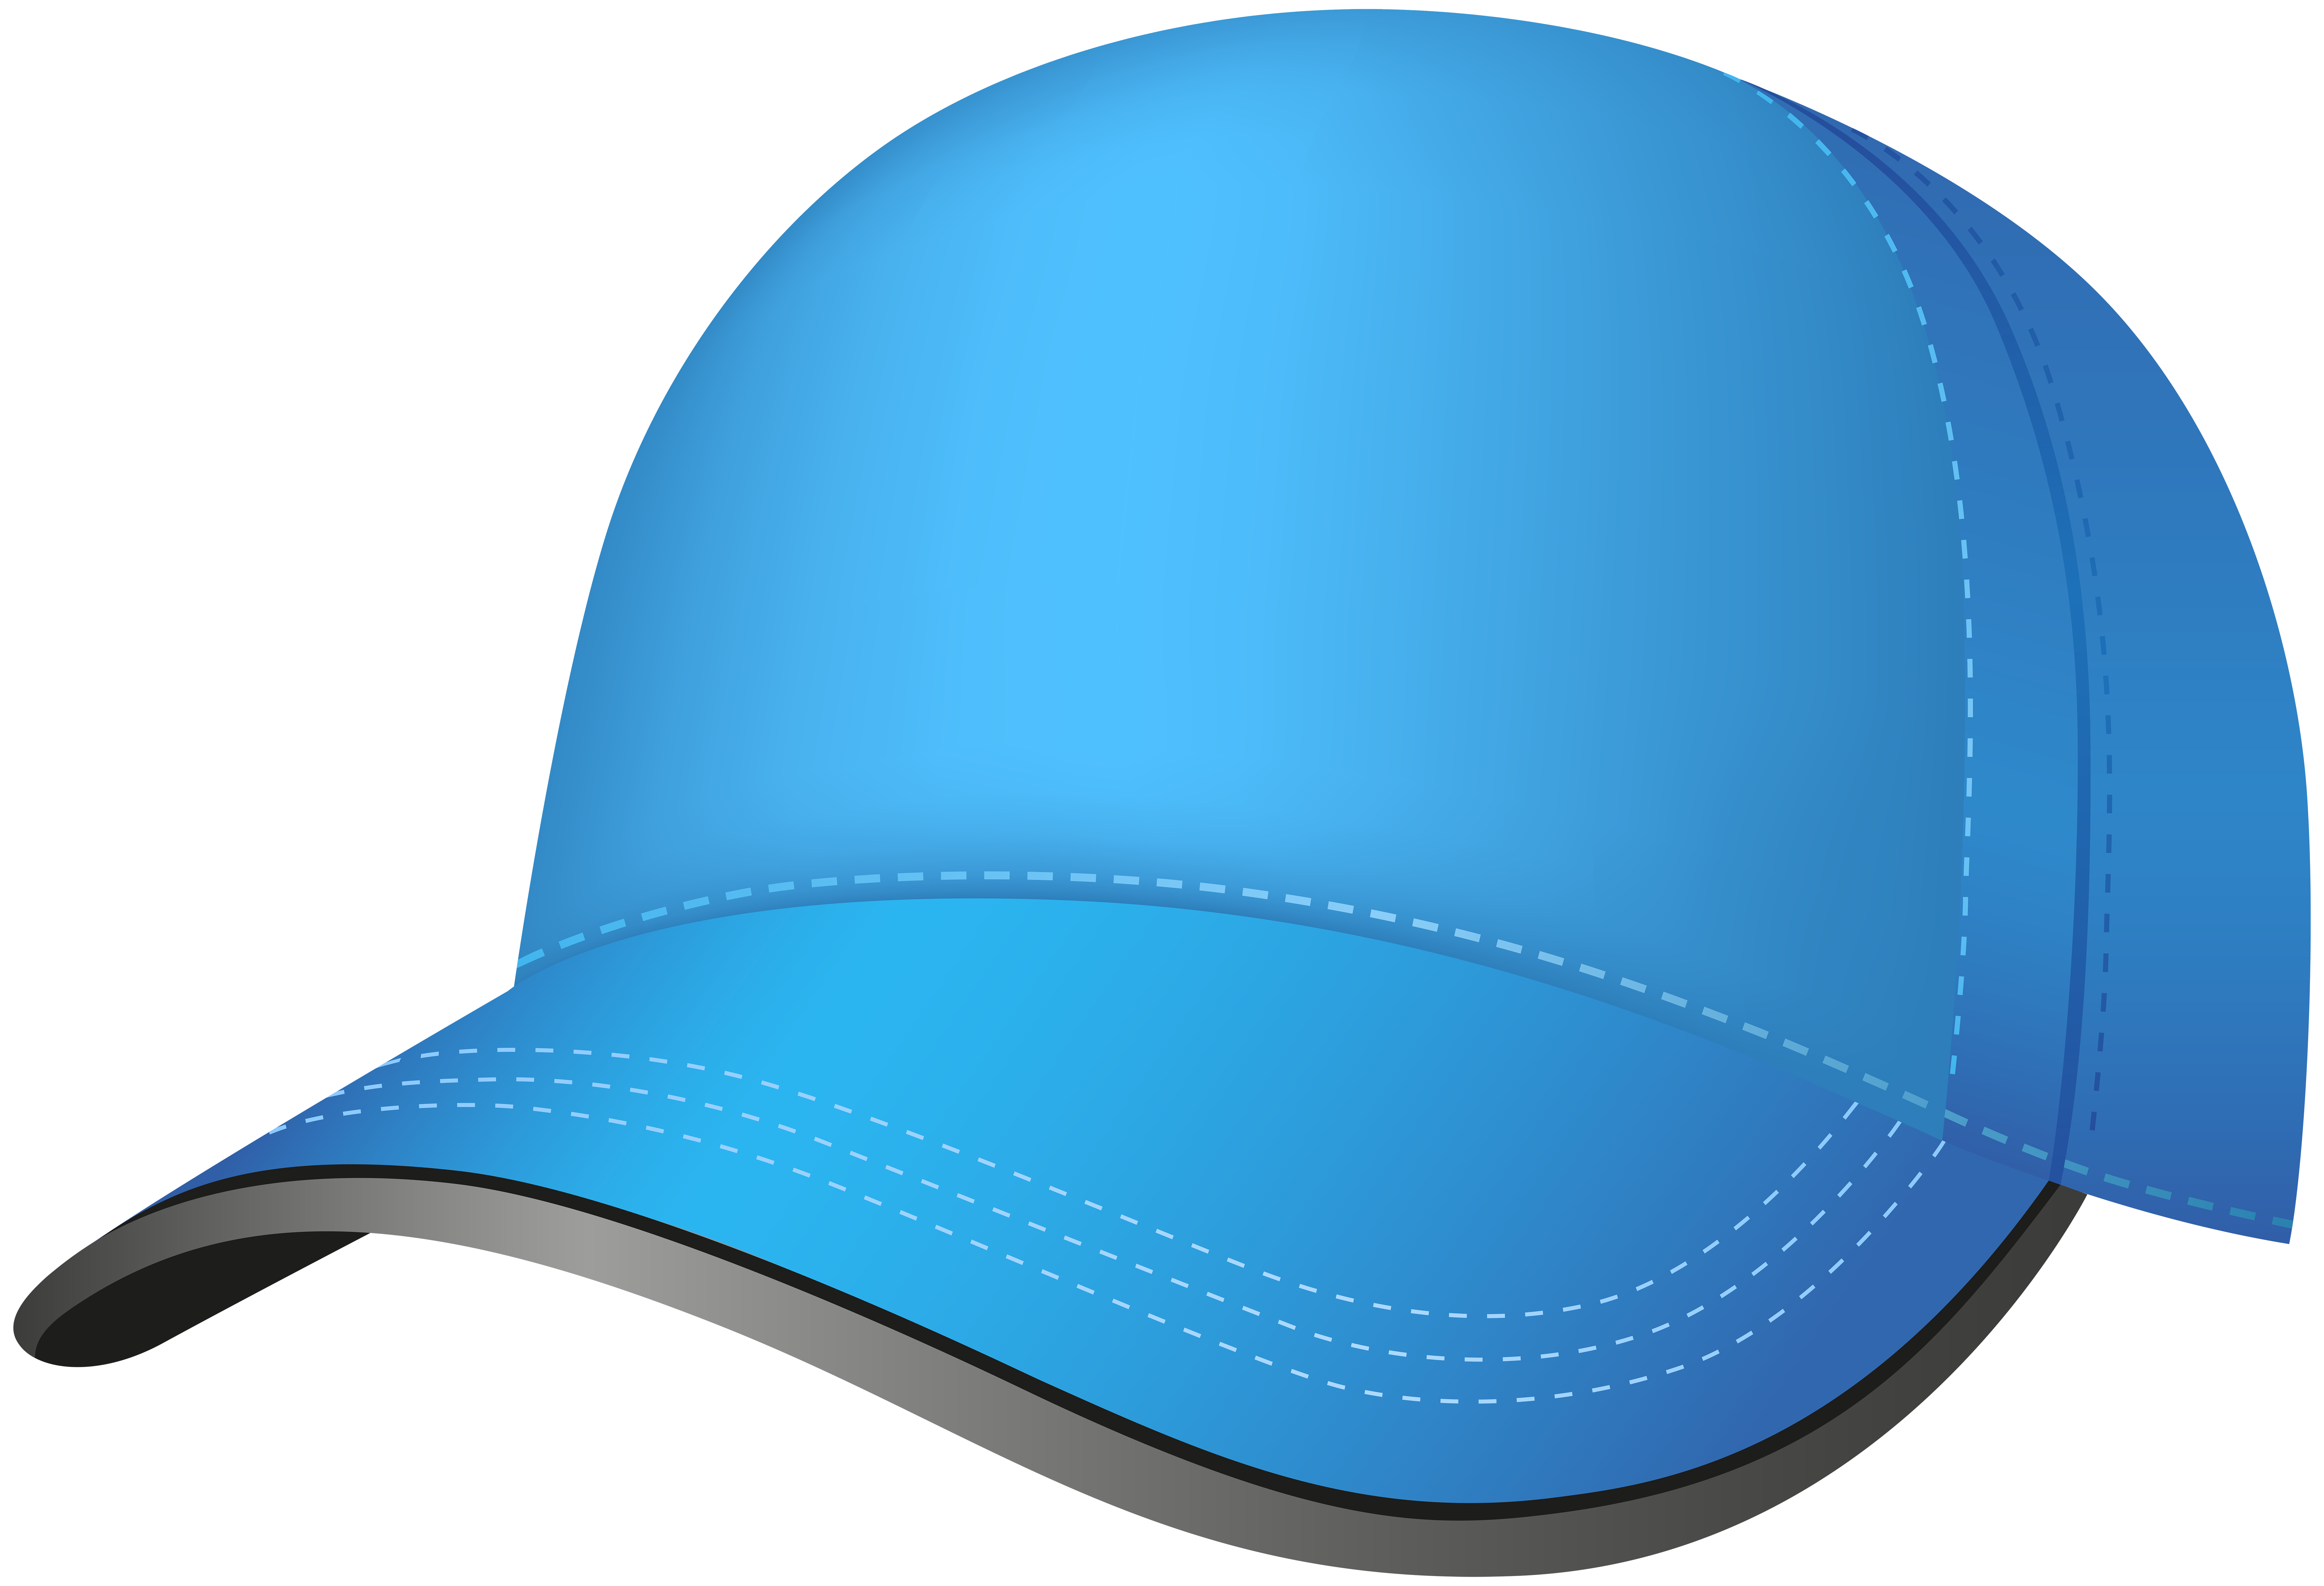 Blue Baseball Cap PNG Clip Art Image​  Gallery Yopriceville - High-Quality  Free Images and Transparent PNG Clipart